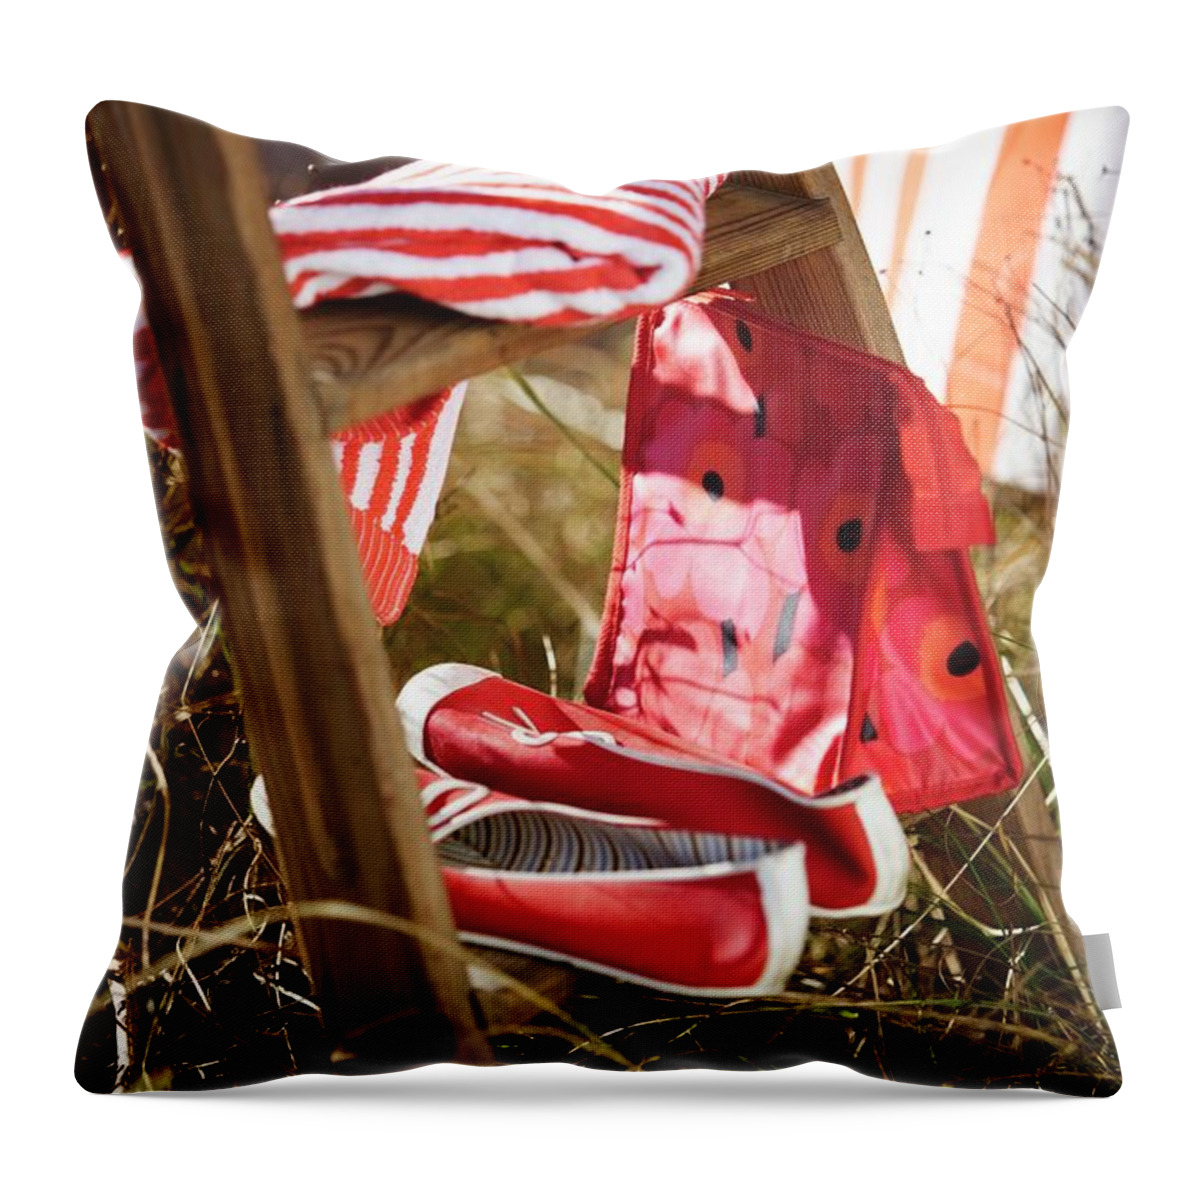 Ip_00705054 Throw Pillow featuring the photograph A Towel, A Red Washbag And A Pair Of Shoes On A Ladder by Per Magnus Persson